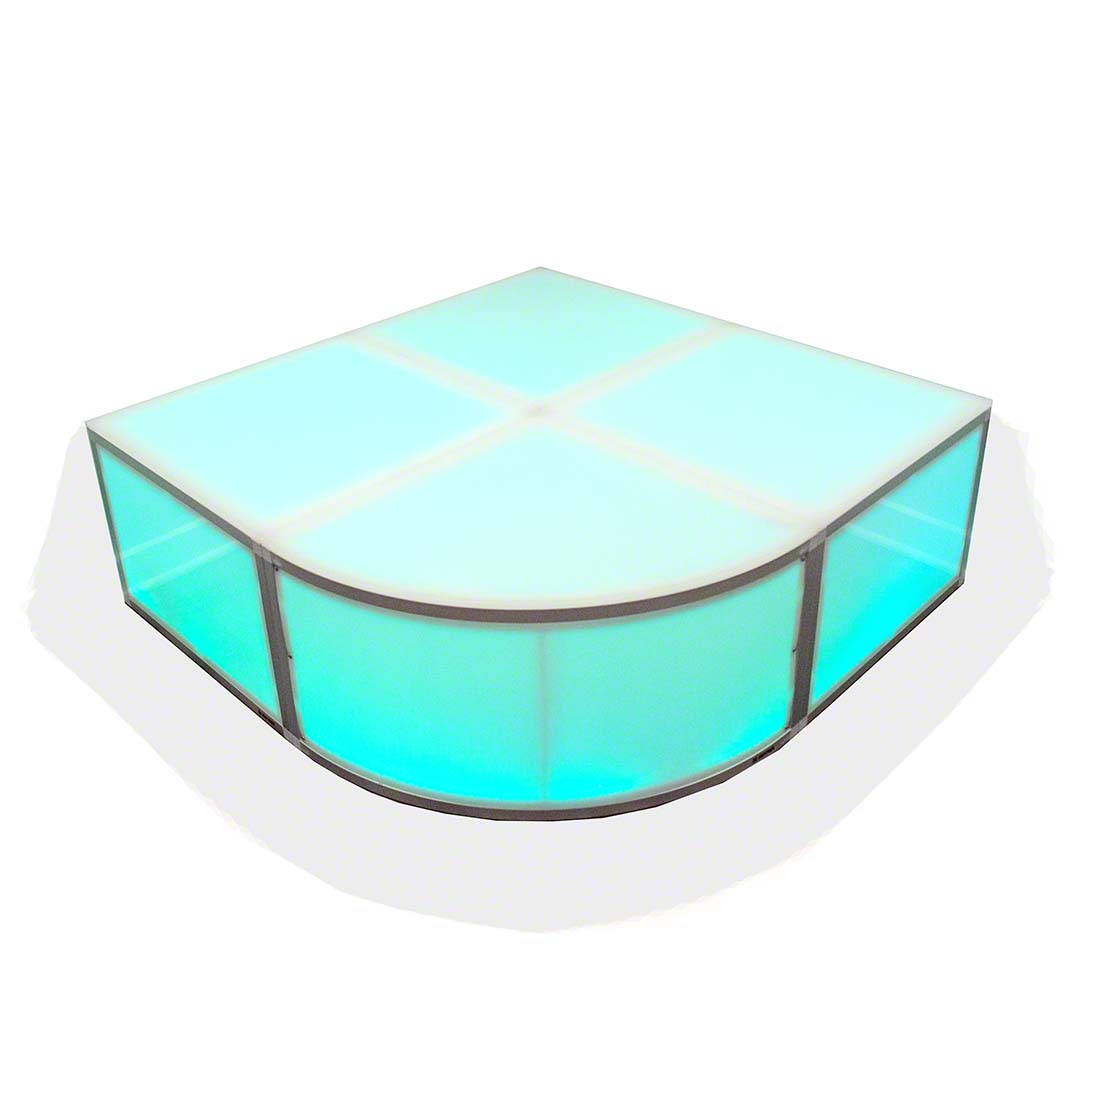 Lumo Stage Acrylic Dance Stage Rounded Corner